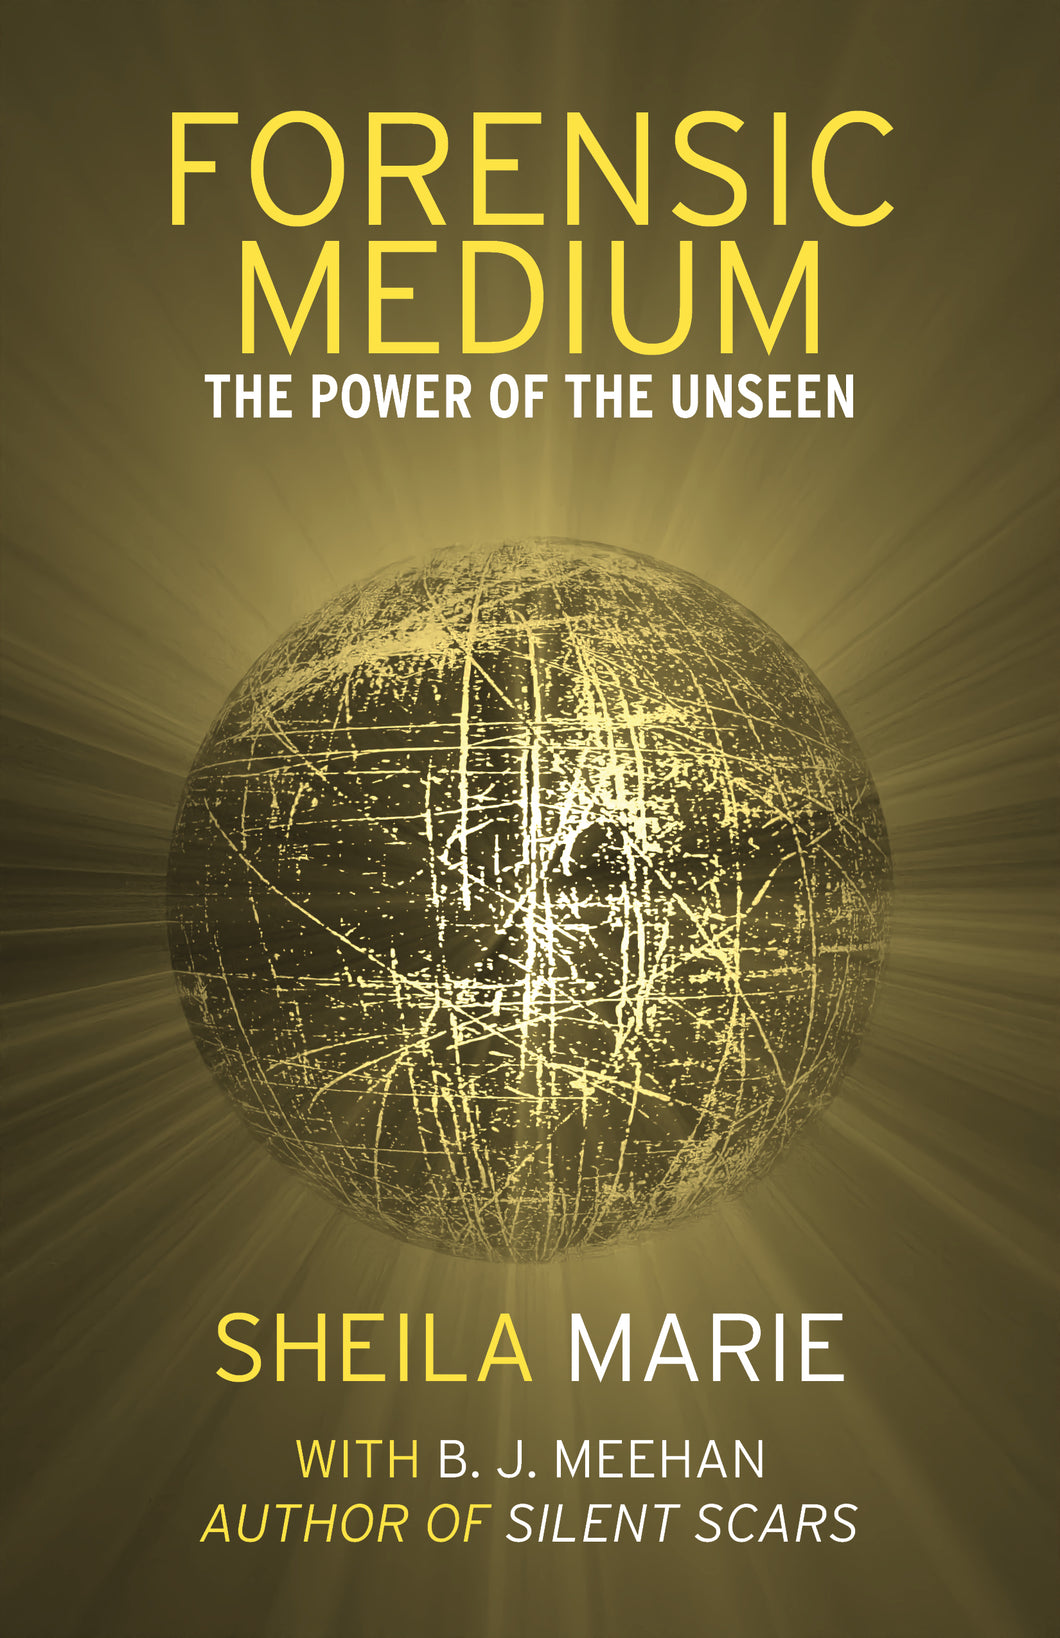 PRE-ORDER / FORENSIC MEDIUM The Power of the Unseen